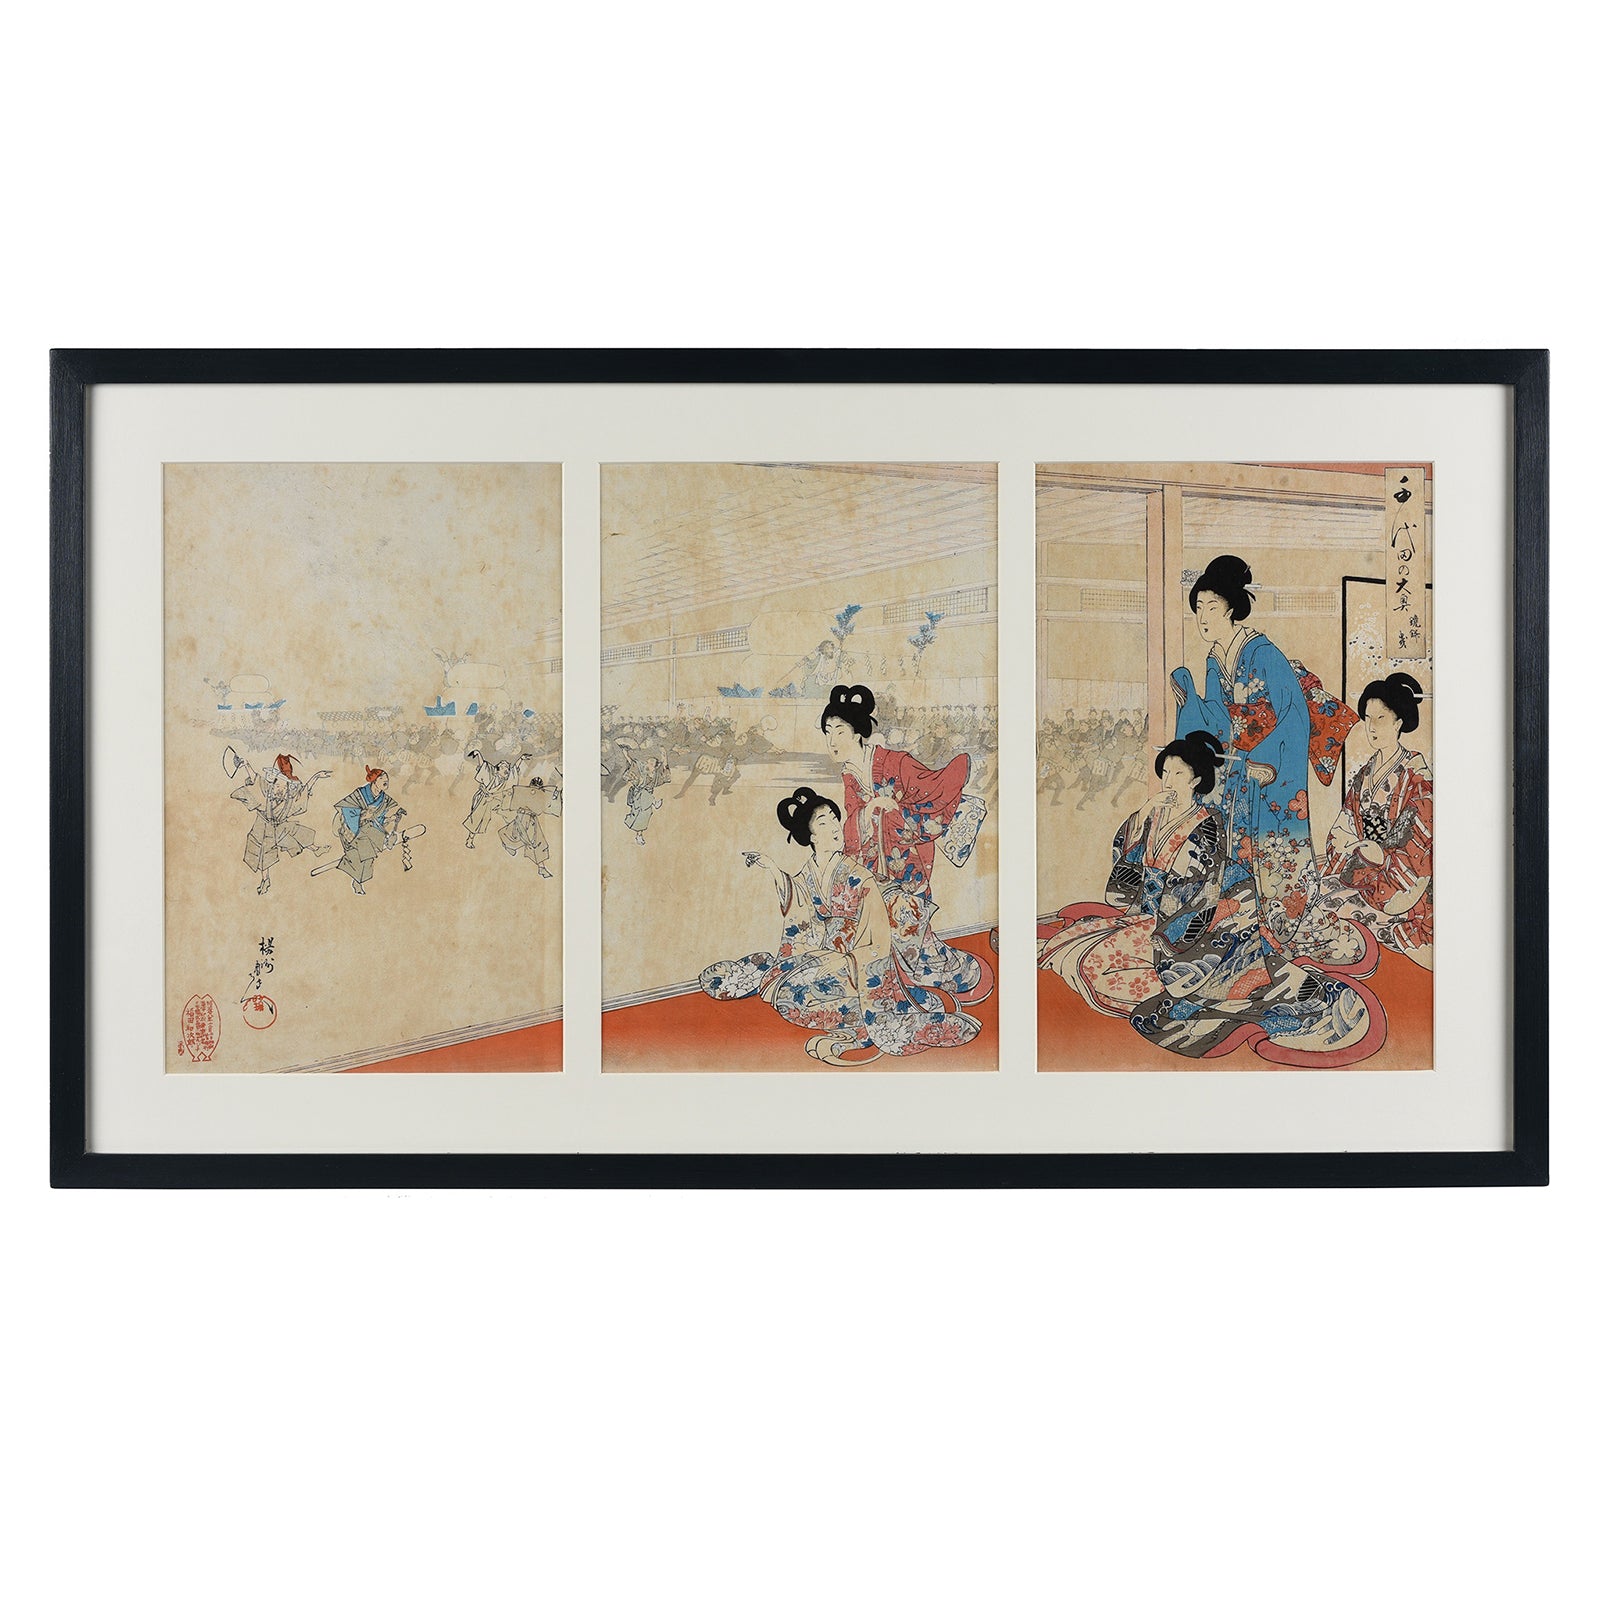 "Rice Cake Parade" from the series "The Inner Palace of Chiyoda". By Chikanobu